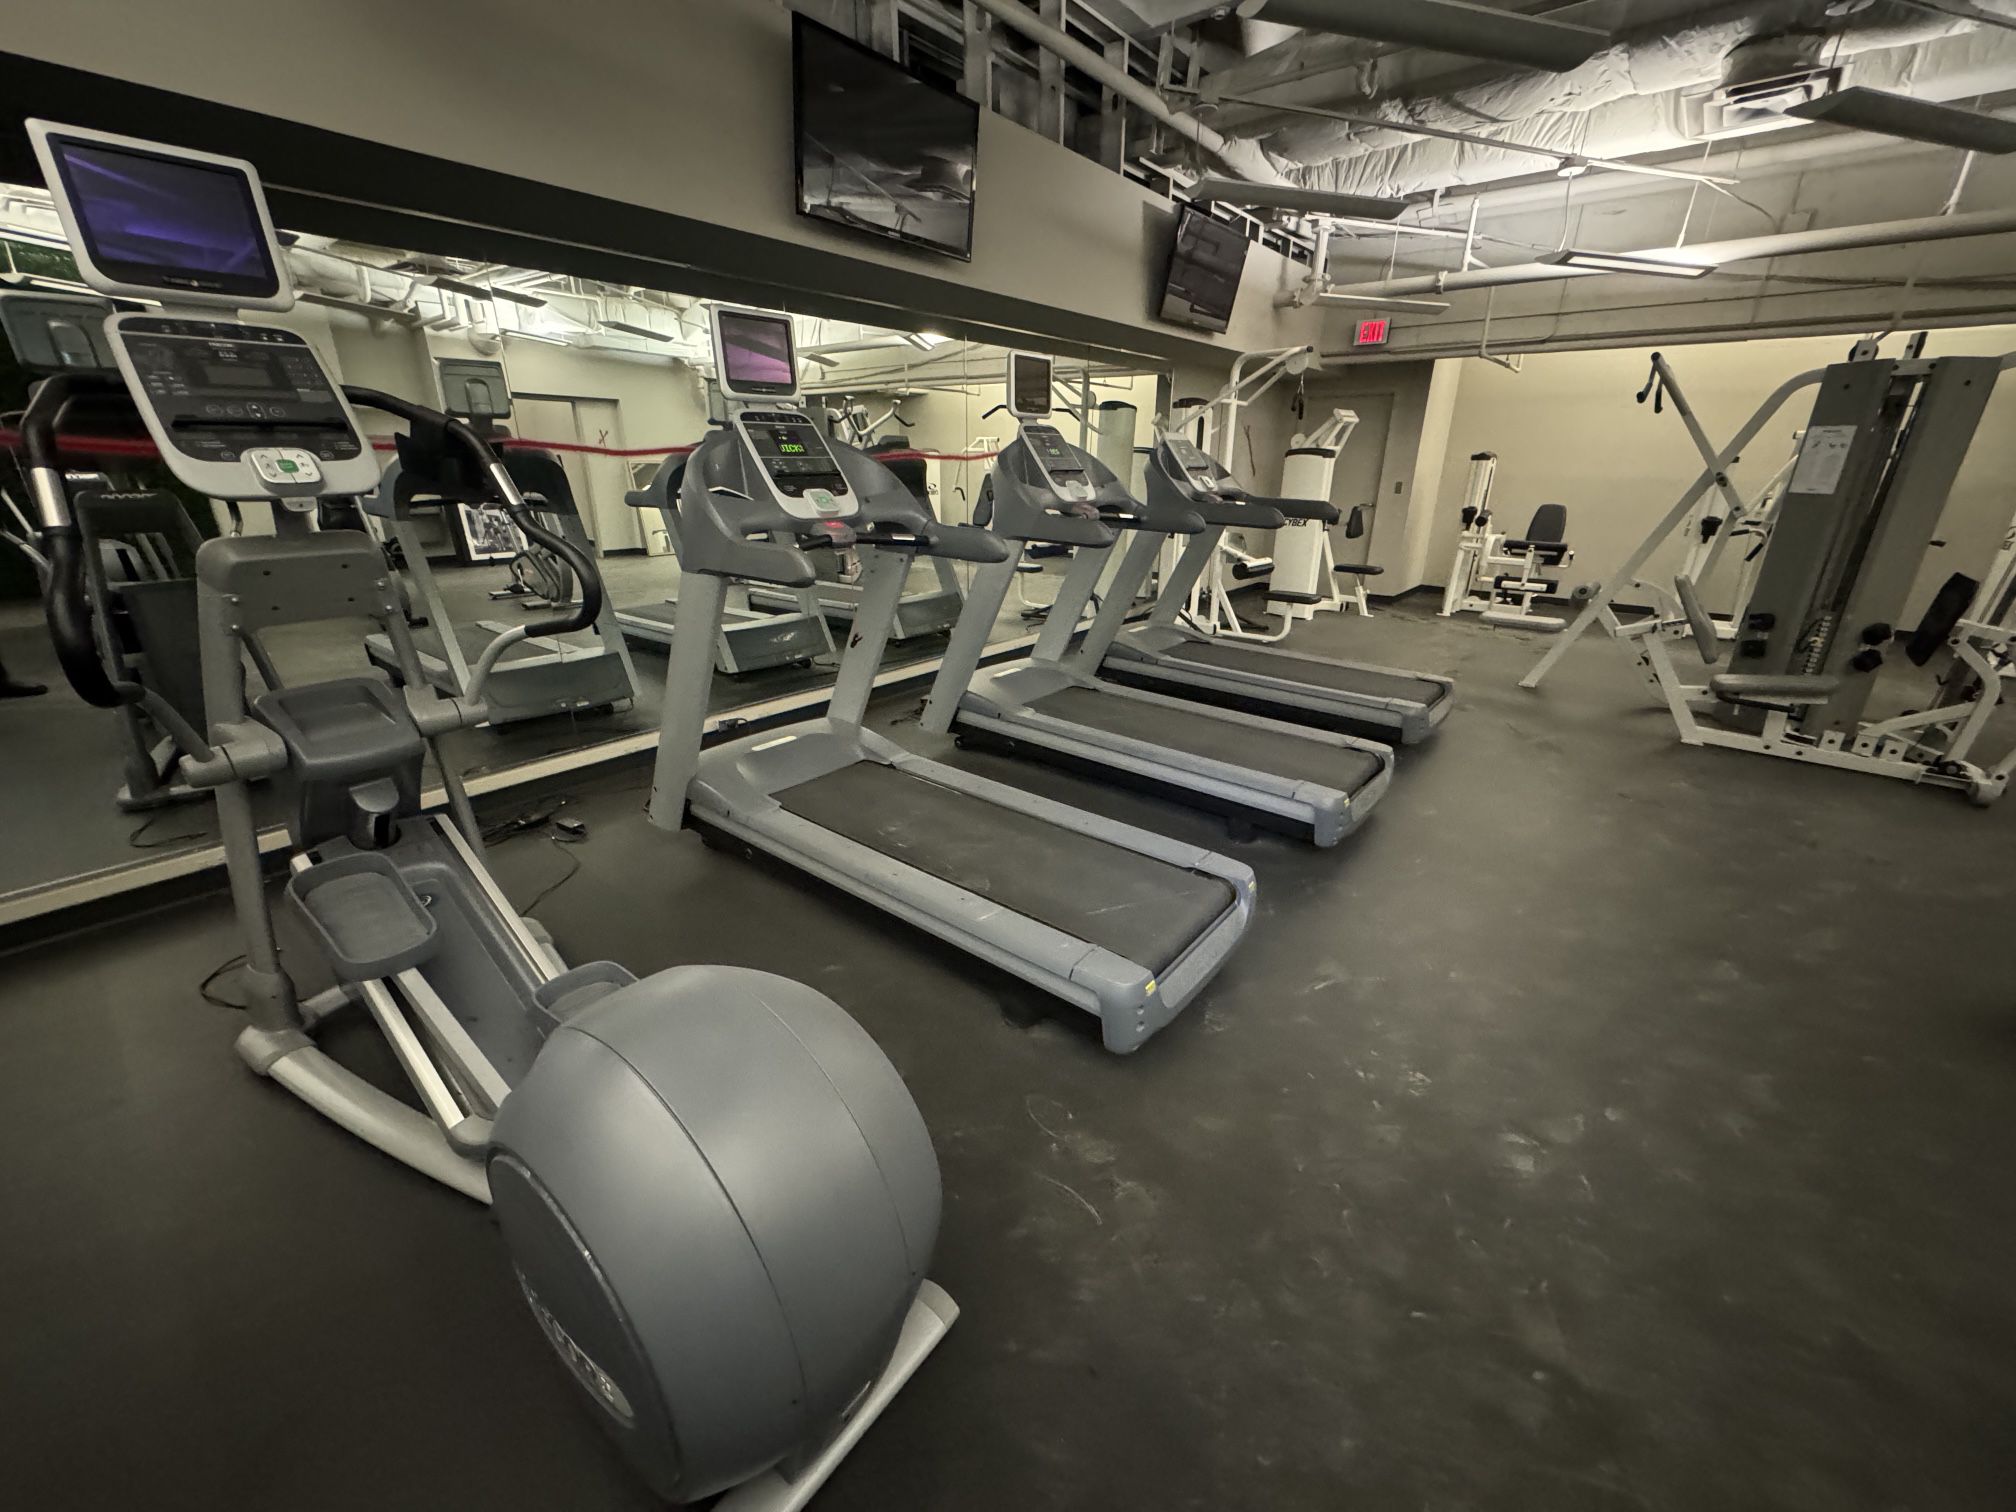 Commercial gym equipment!!!